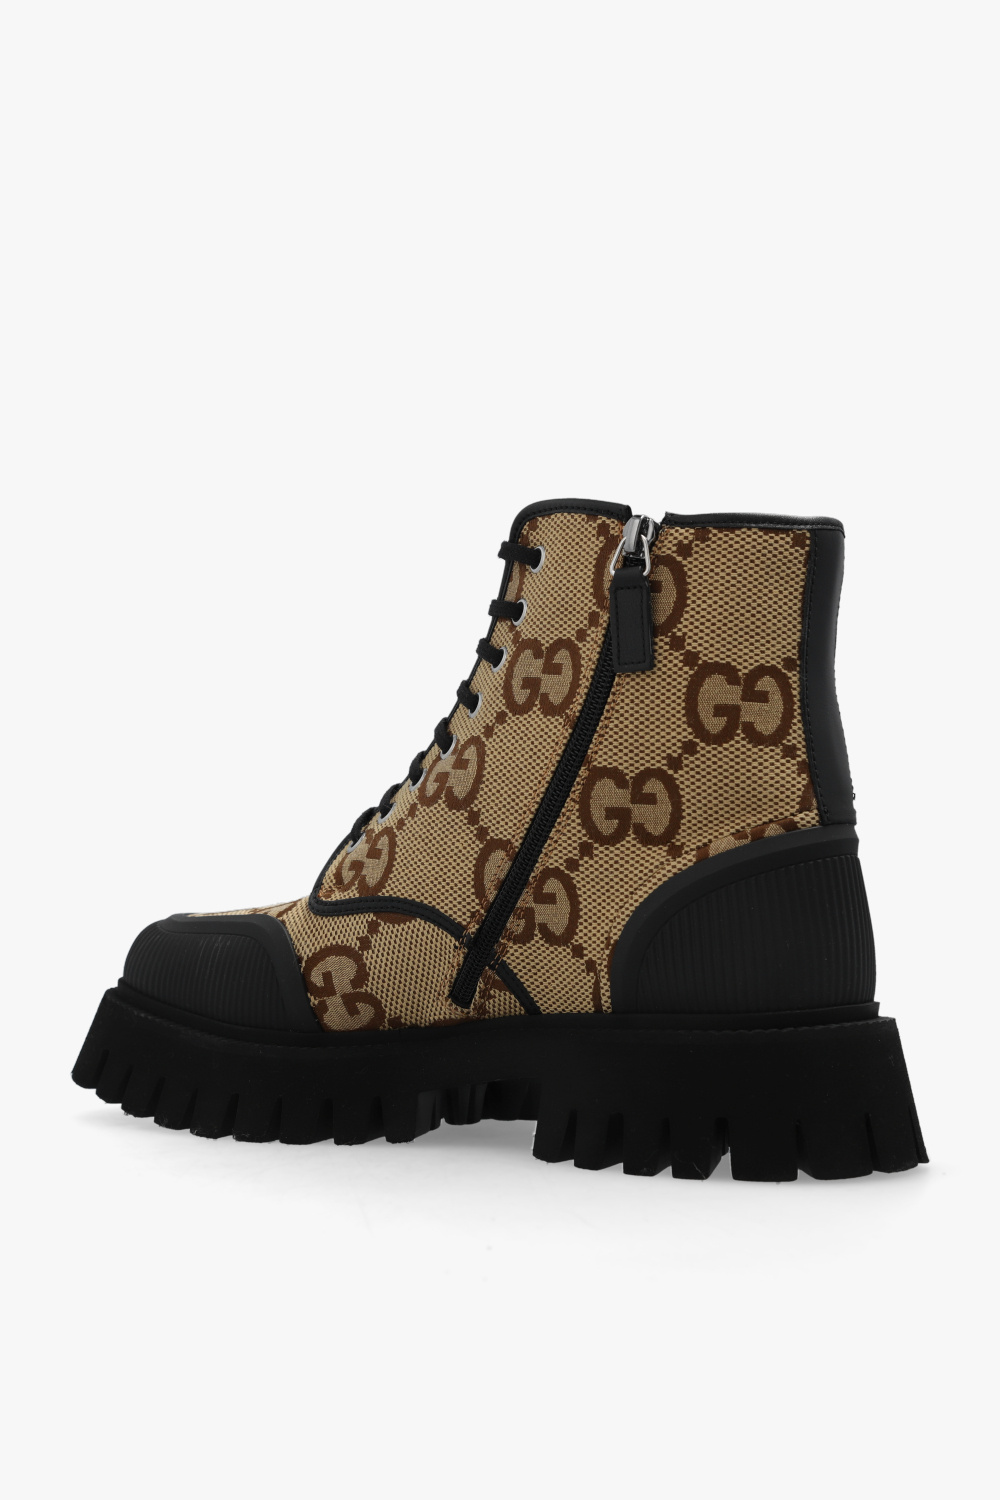 Gucci GUCCI QUILTED WEDGE SHOES